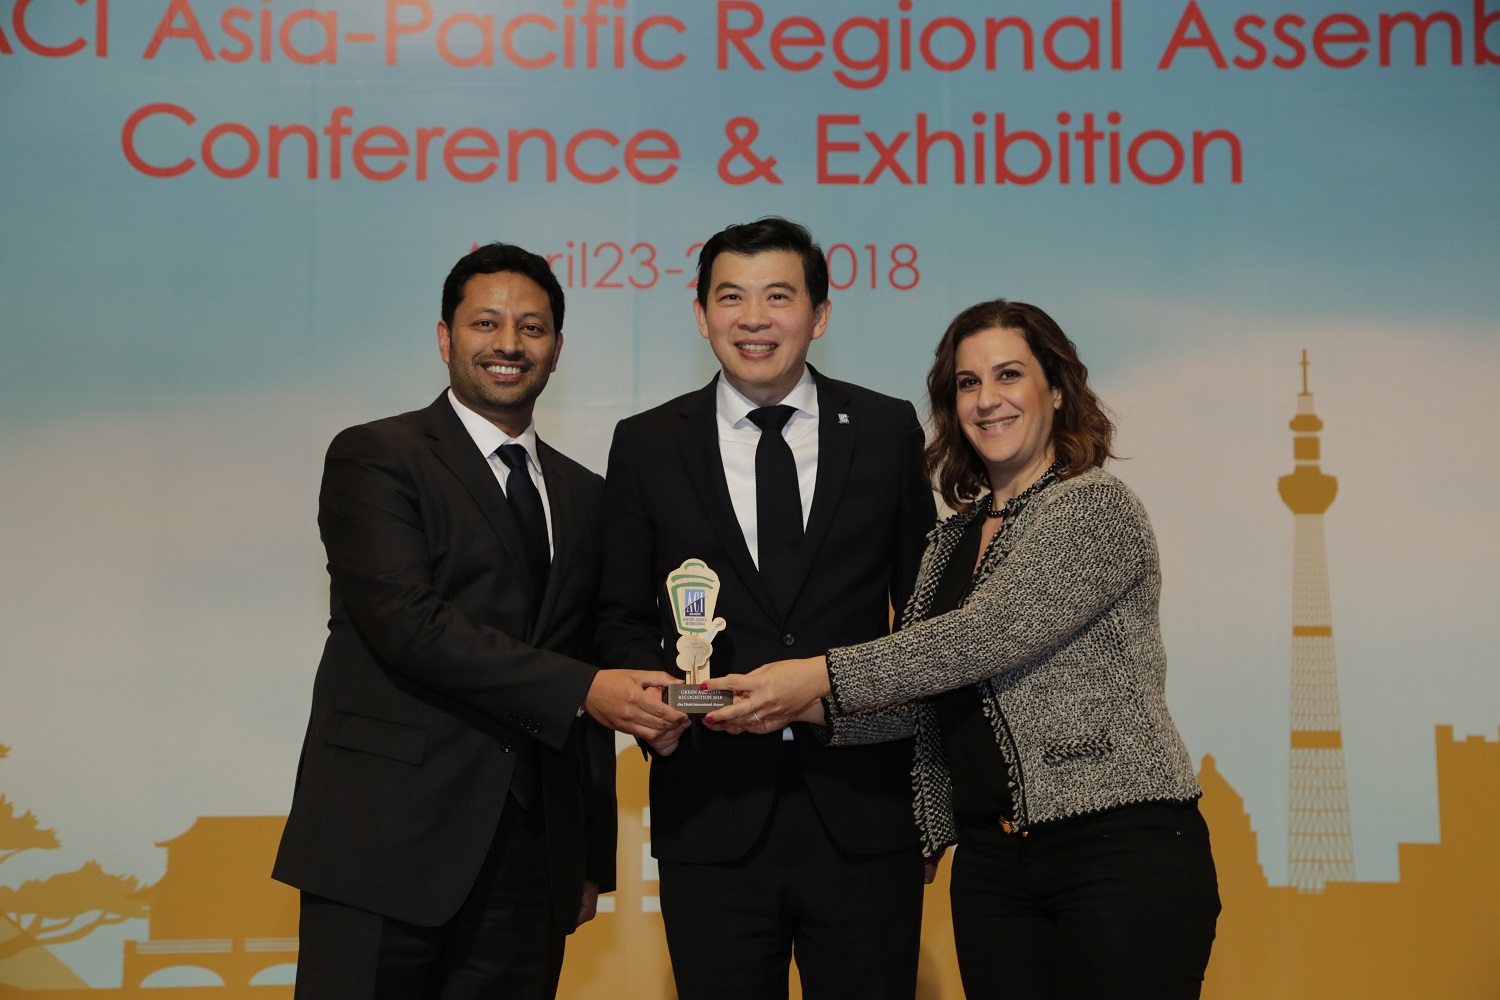 Abu Dhabi International Airport Bags Top Recognition from ACI Asia Pacific 